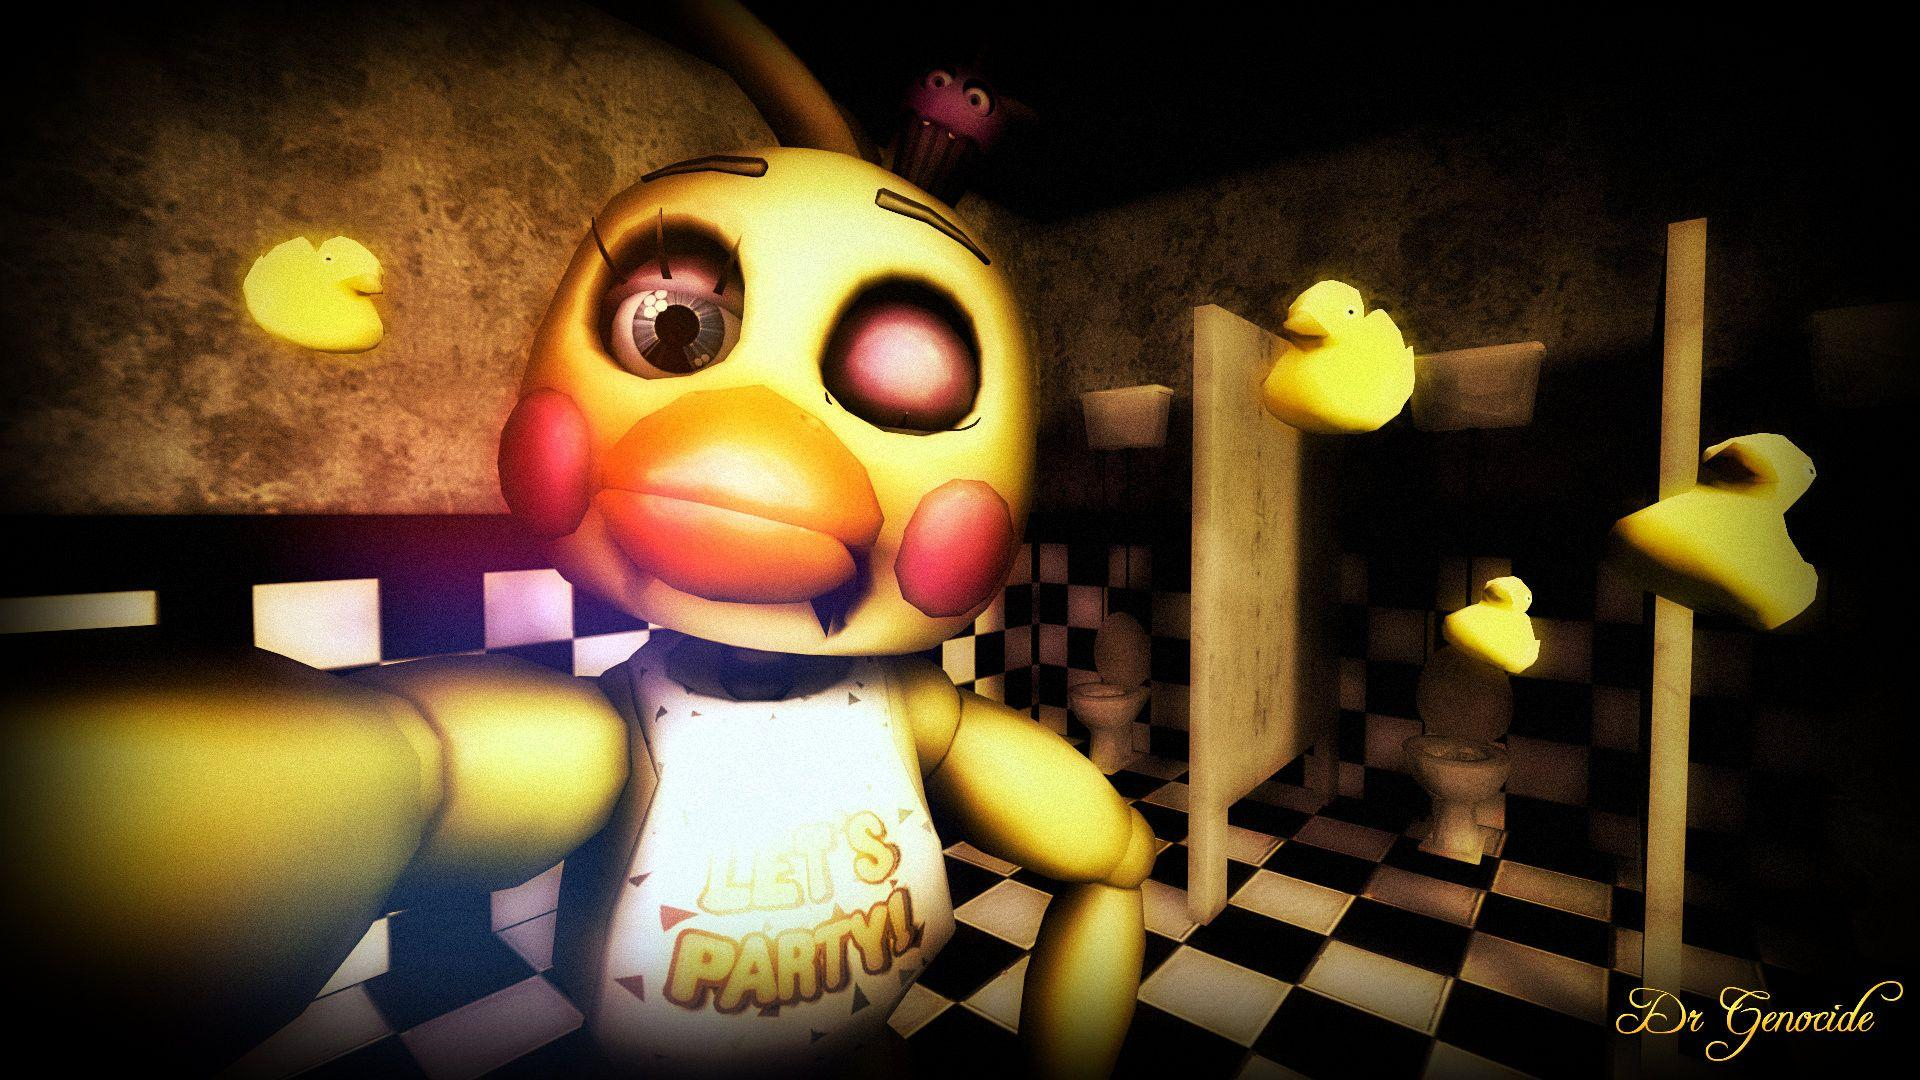 1920x1080 Toy Chica Wallpapers